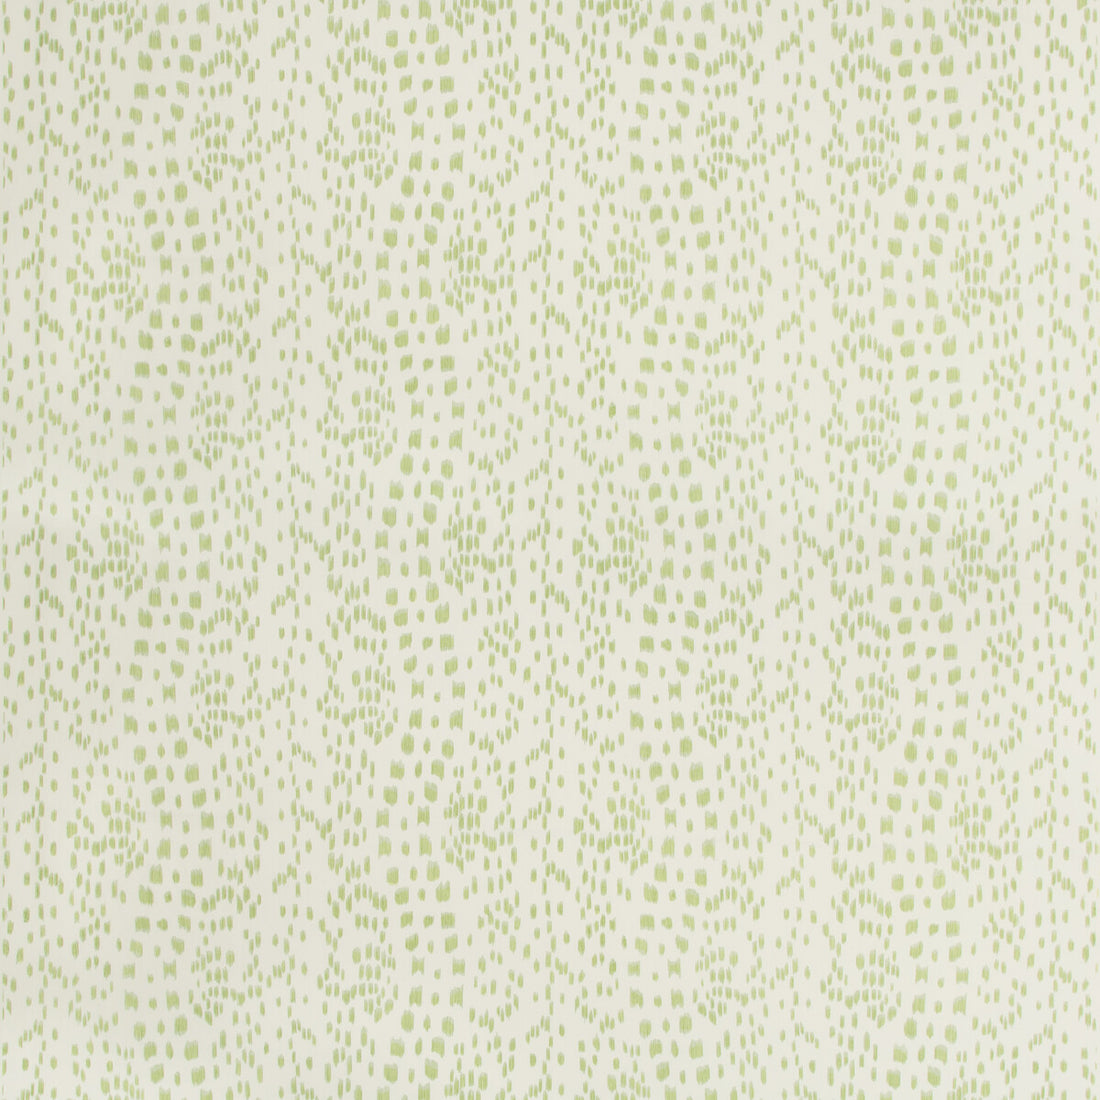 Les Touches fabric in peridot color - pattern 8012138.303.0 - by Brunschwig &amp; Fils in the B&amp;F Showroom Exclusive 2019 collection